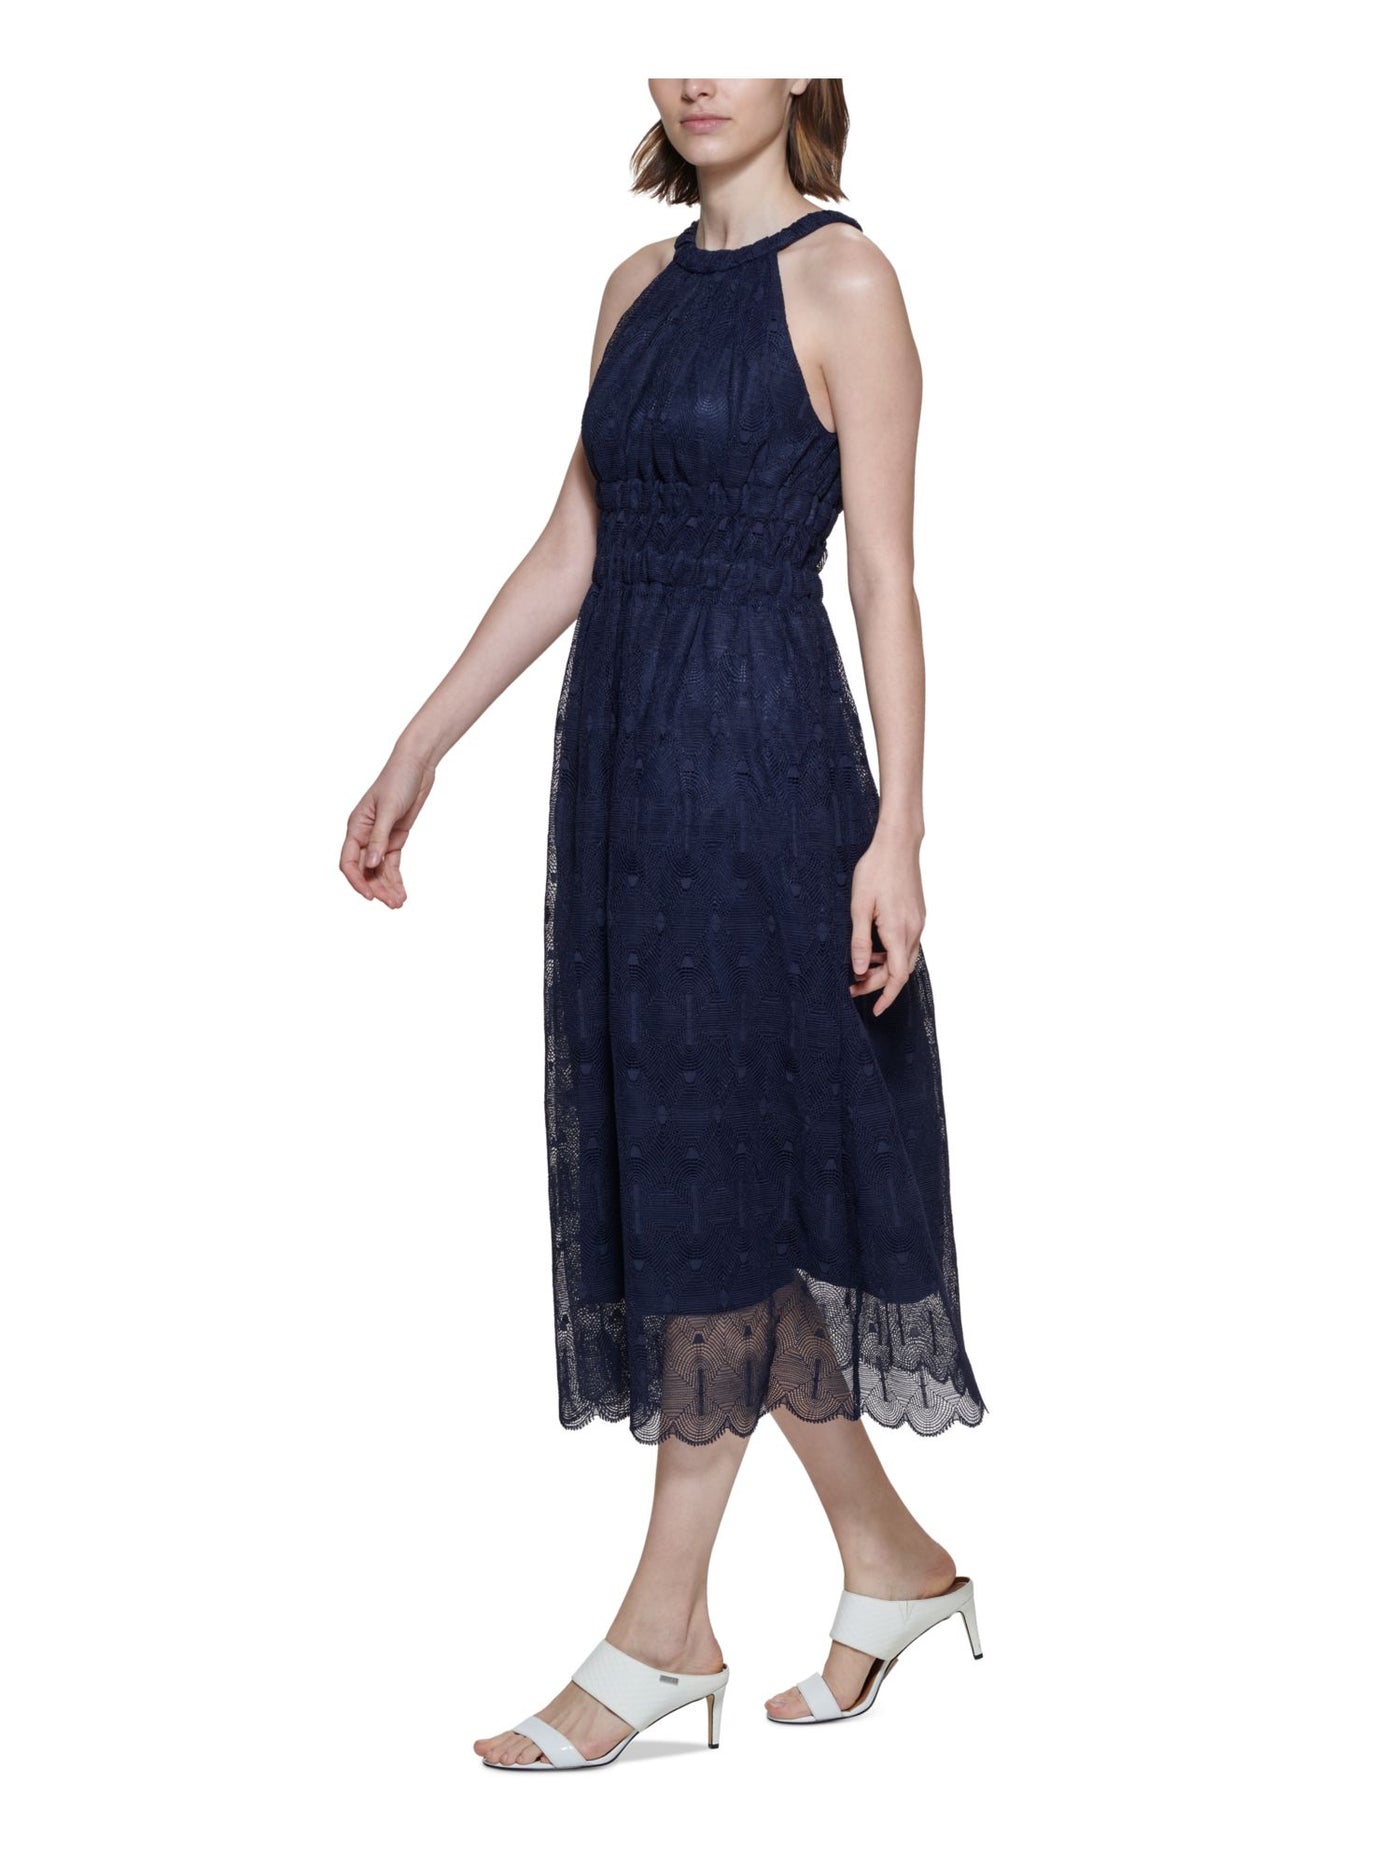 CALVIN KLEIN Womens Navy Zippered Textured Lace Lined Smocked Scalloped Sleeveless Halter Tea-Length Fit + Flare Dress 12